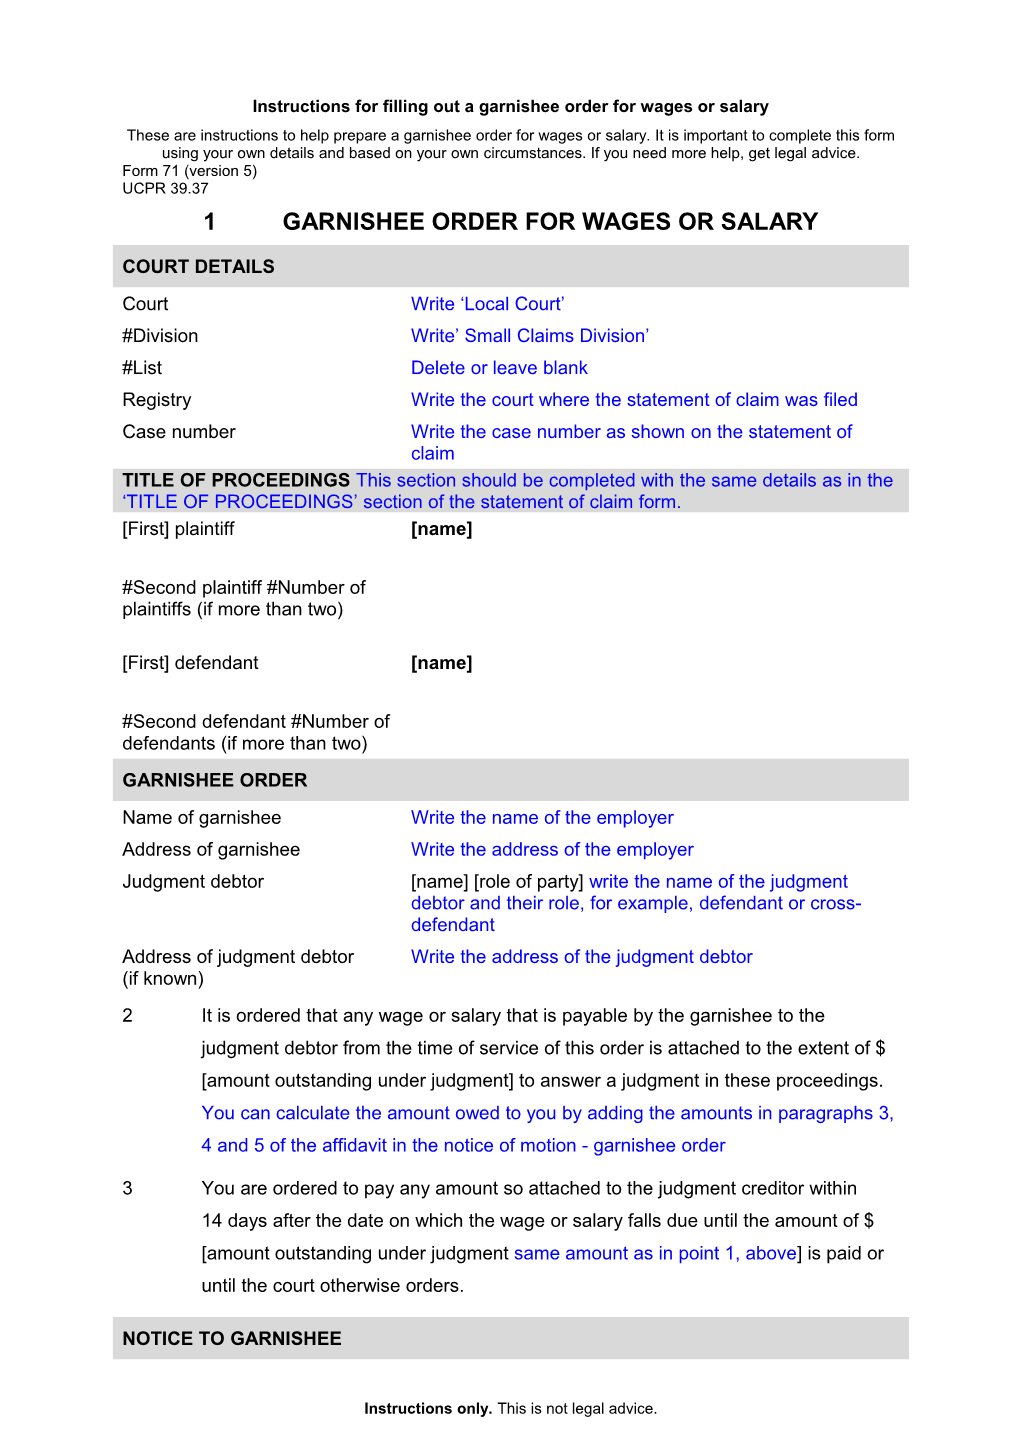 Form 71 - Garnishee Order for Wages Or Salary